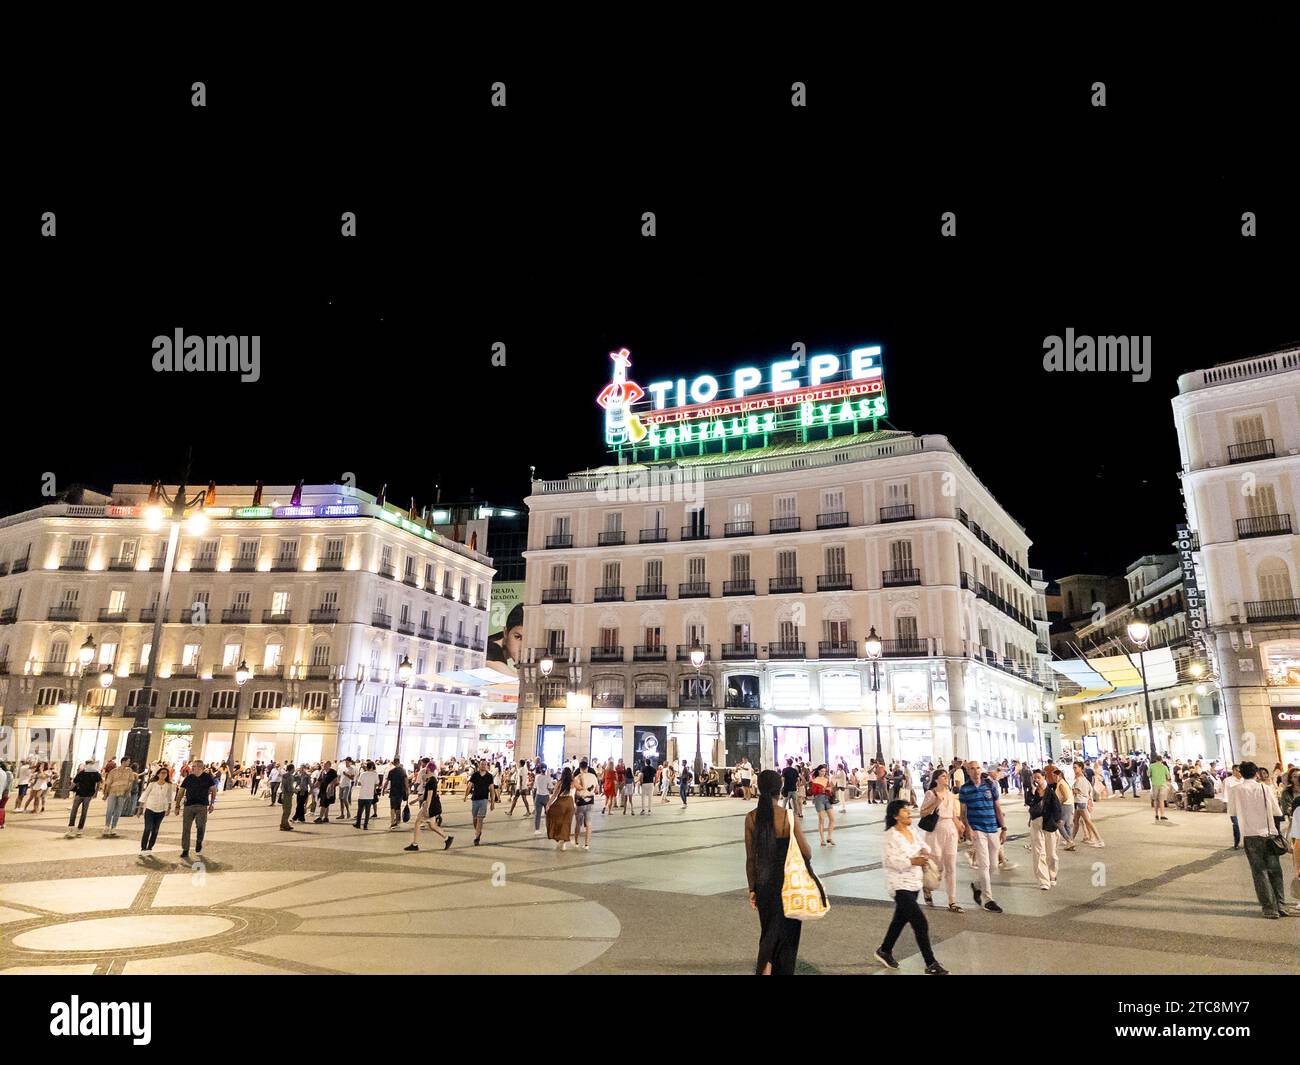 Madrid, Spain - August 29, 2023: The iconic Tio Pepe neon sign atop a building the the busy Puerta del Sol at night Stock Photo